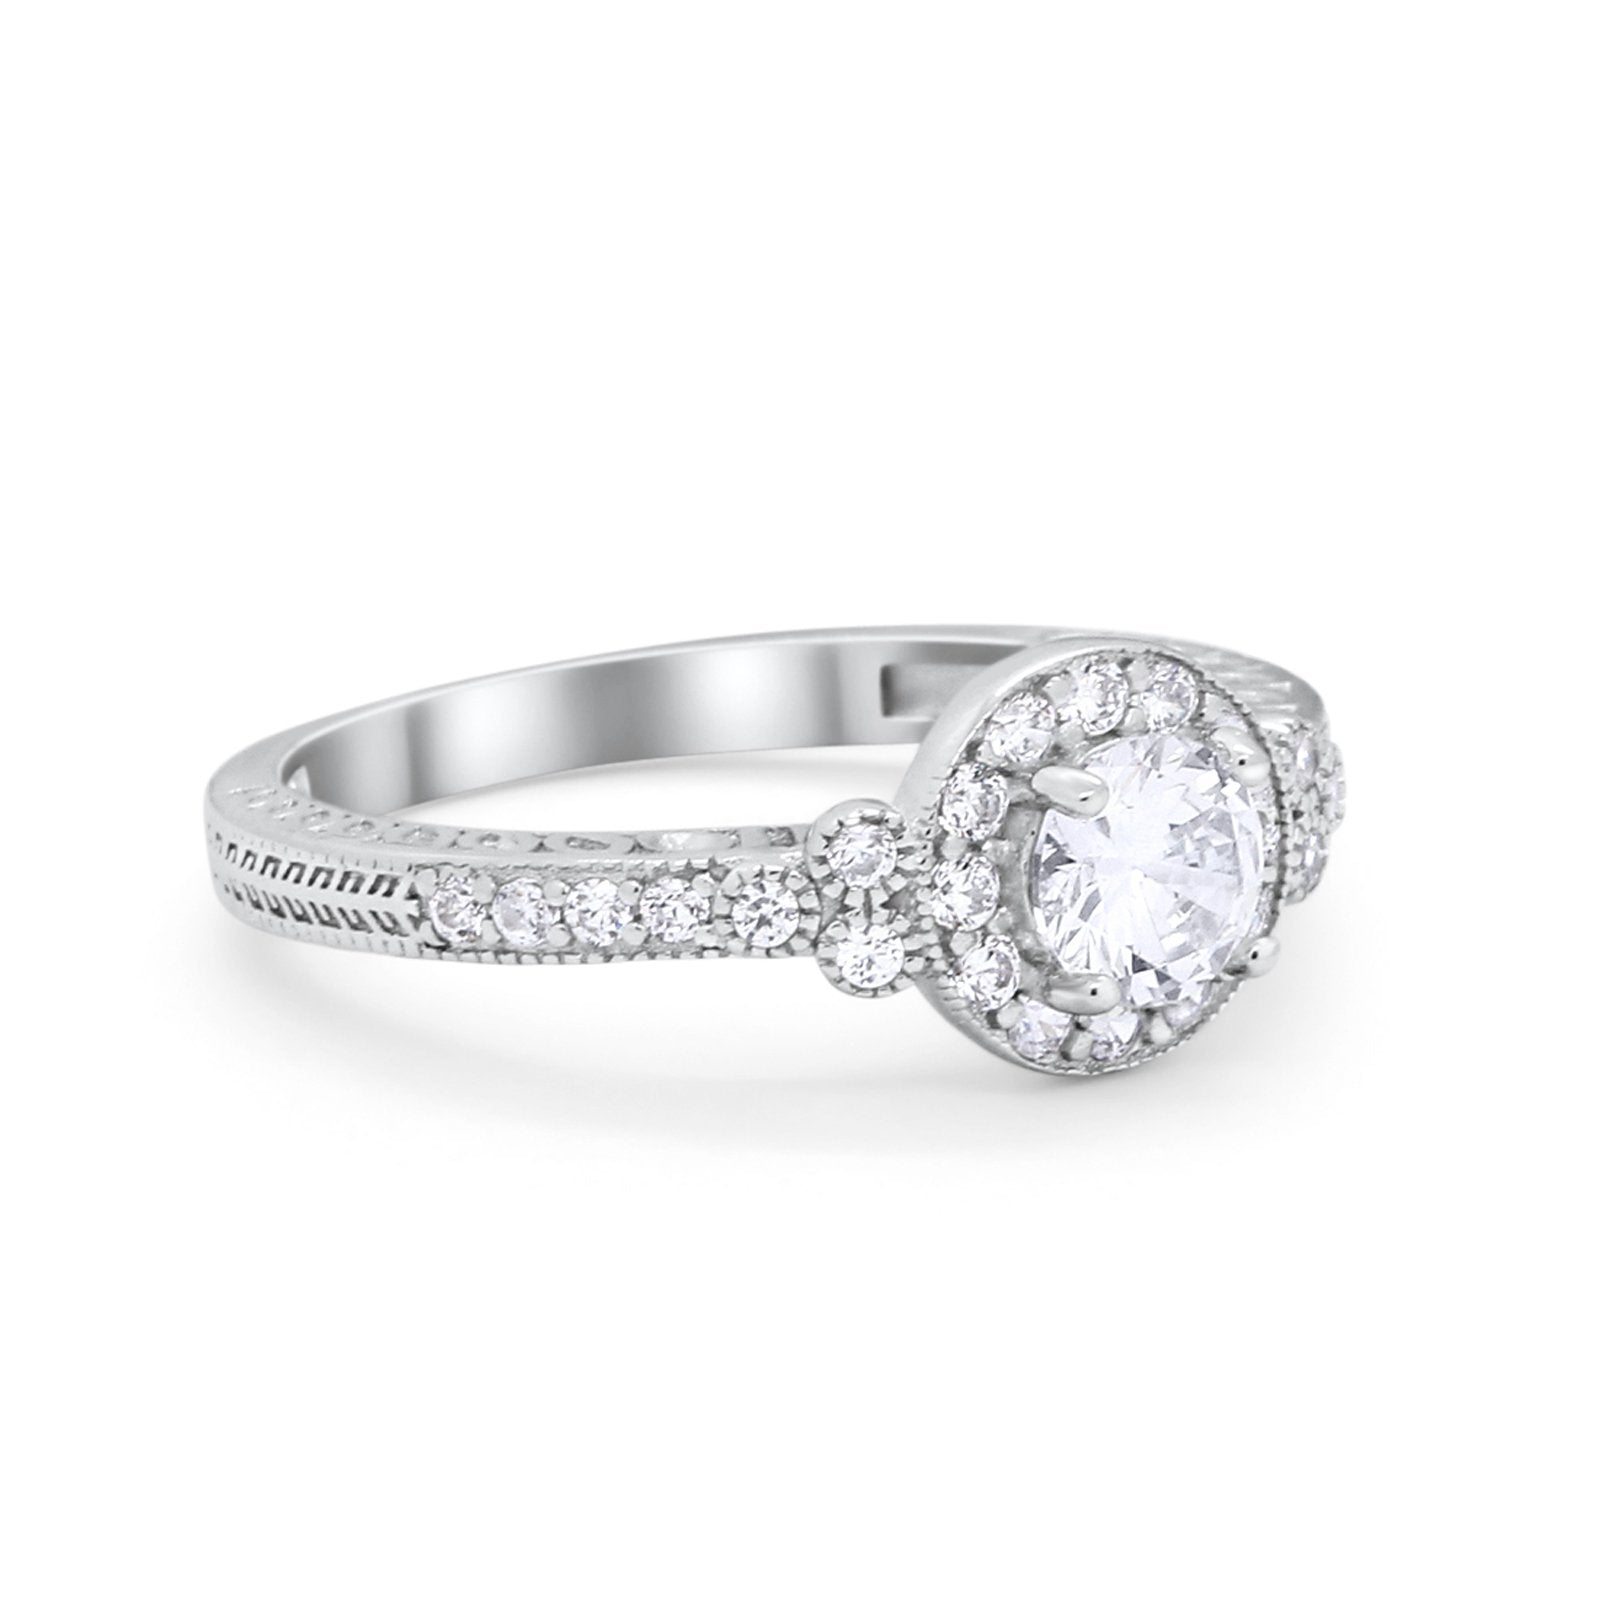 Vintage Style Halo Bridal Wedding Ring Round Simulated CZ 925 Sterling Silver